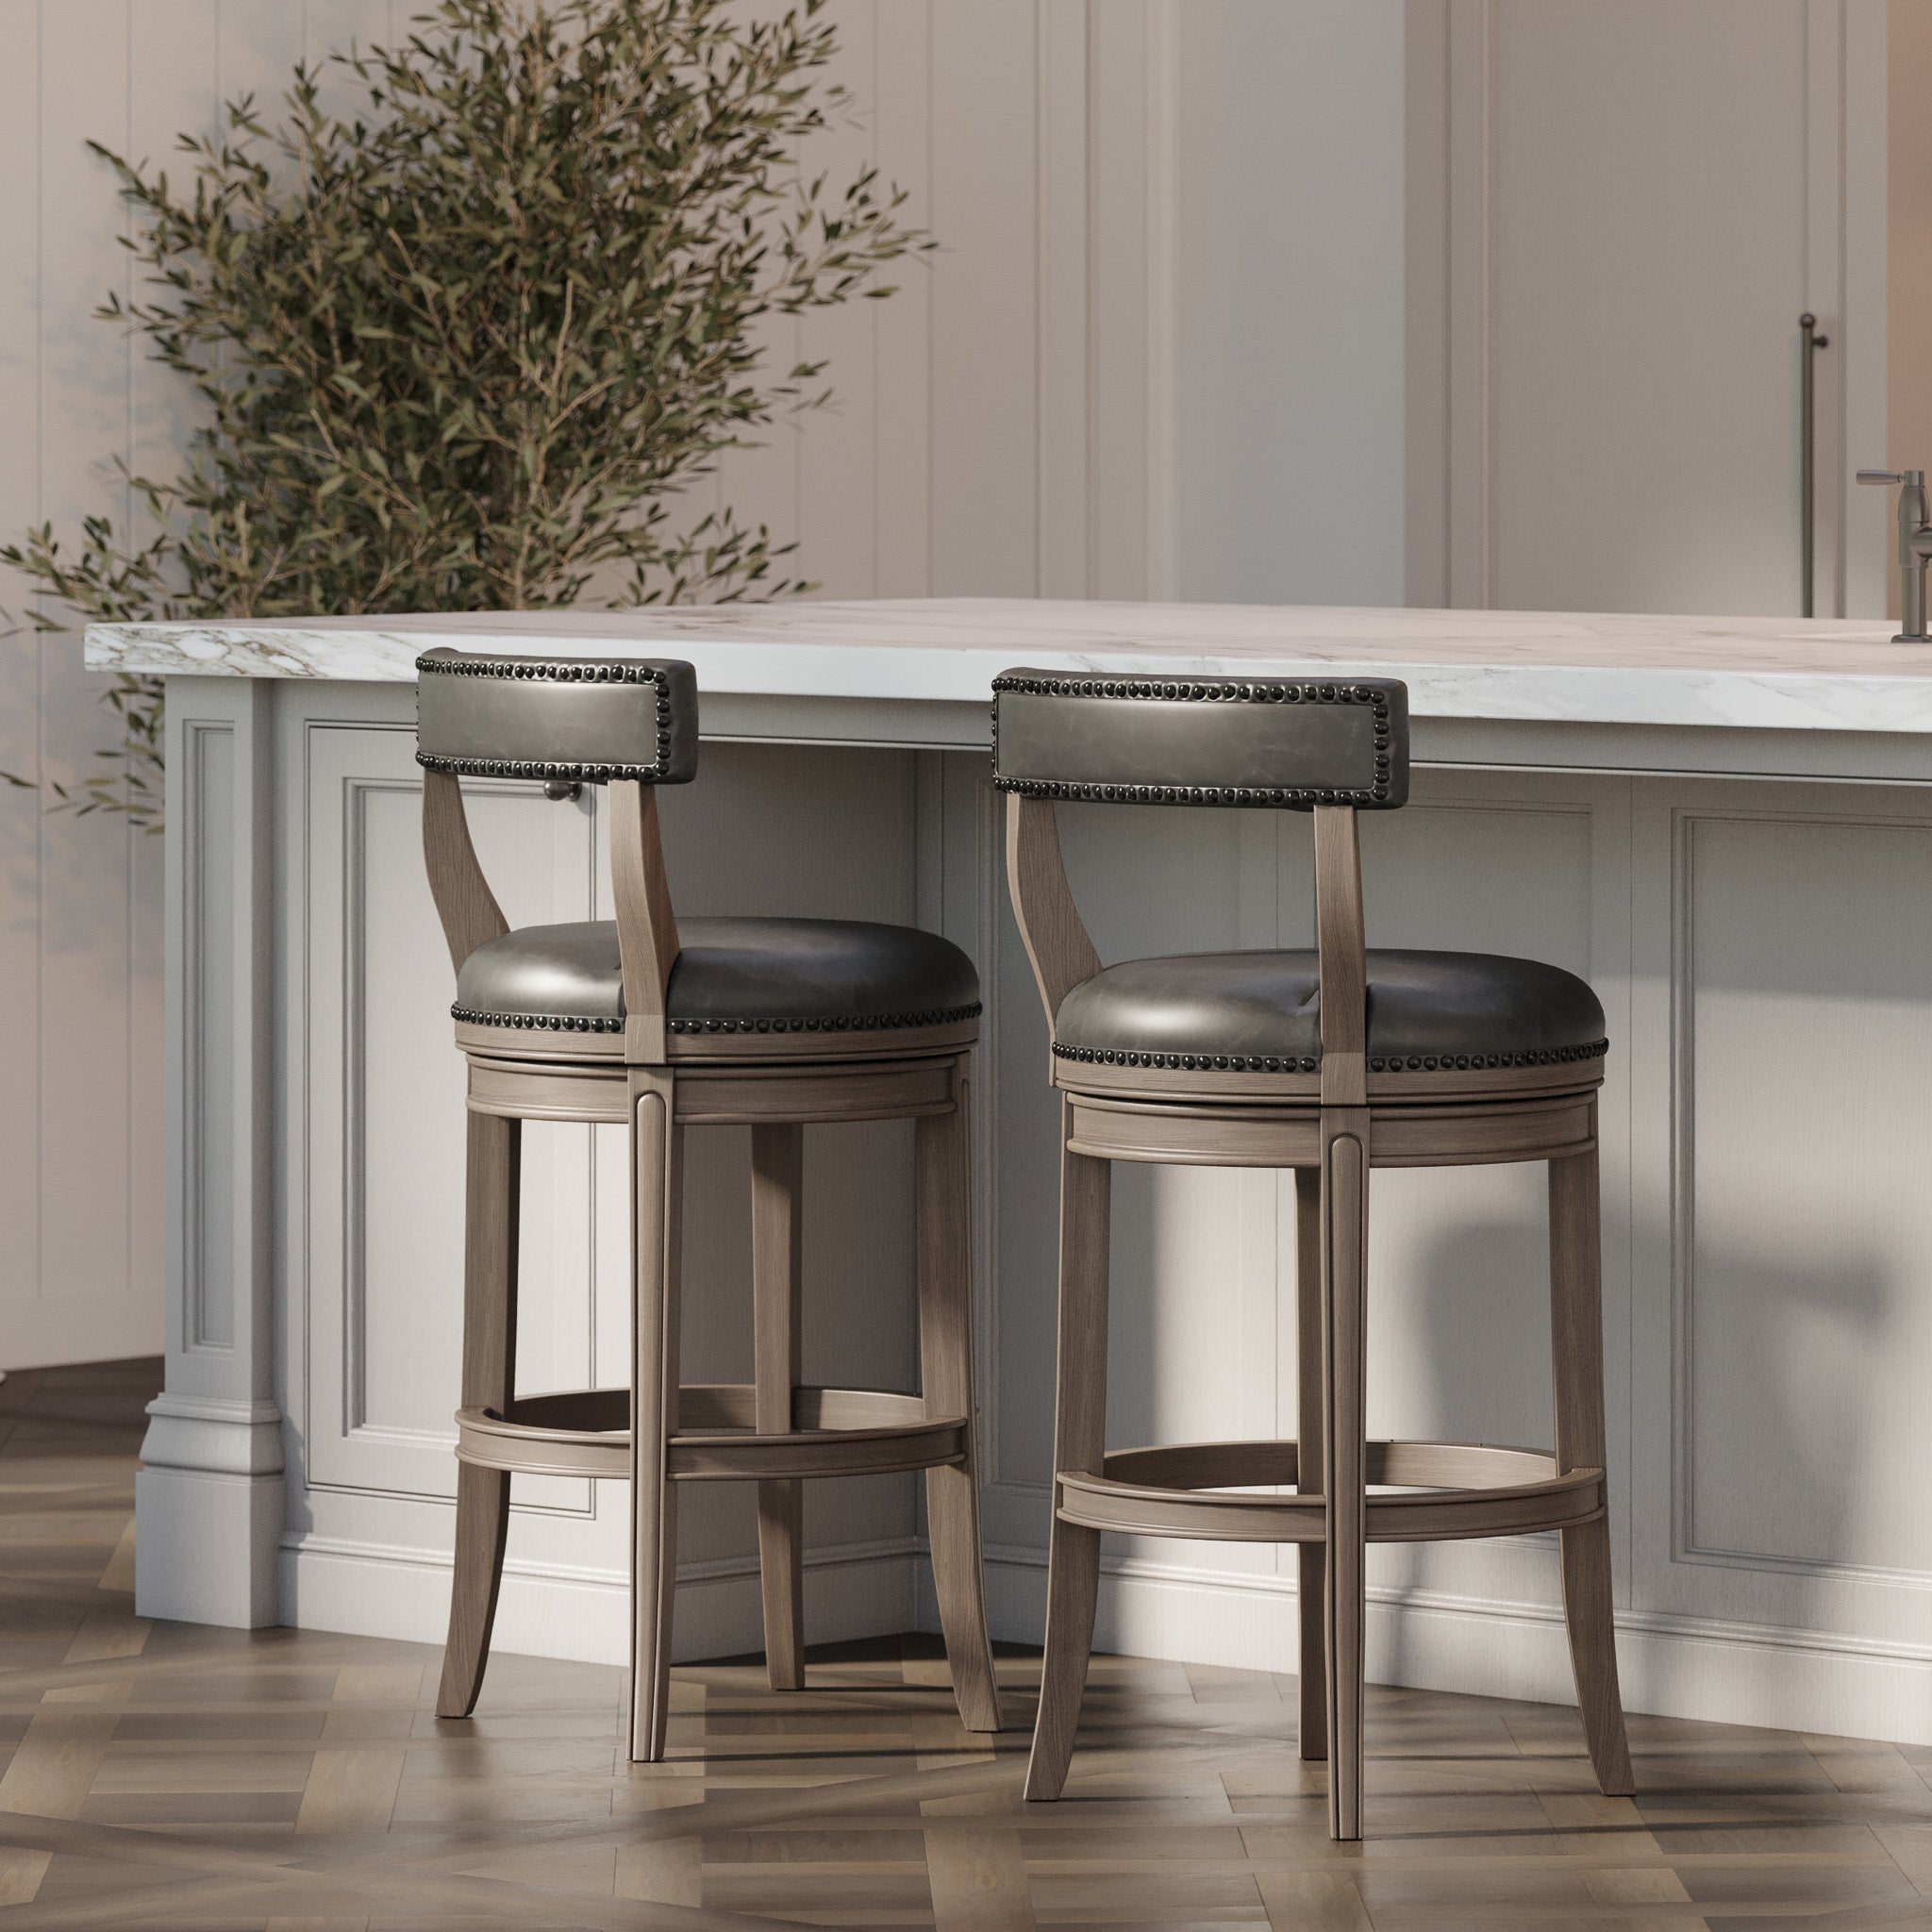 Alexander Bar Stool in Reclaimed Oak Finish with Ronan Stone Vegan Leather in Stools by Maven Lane